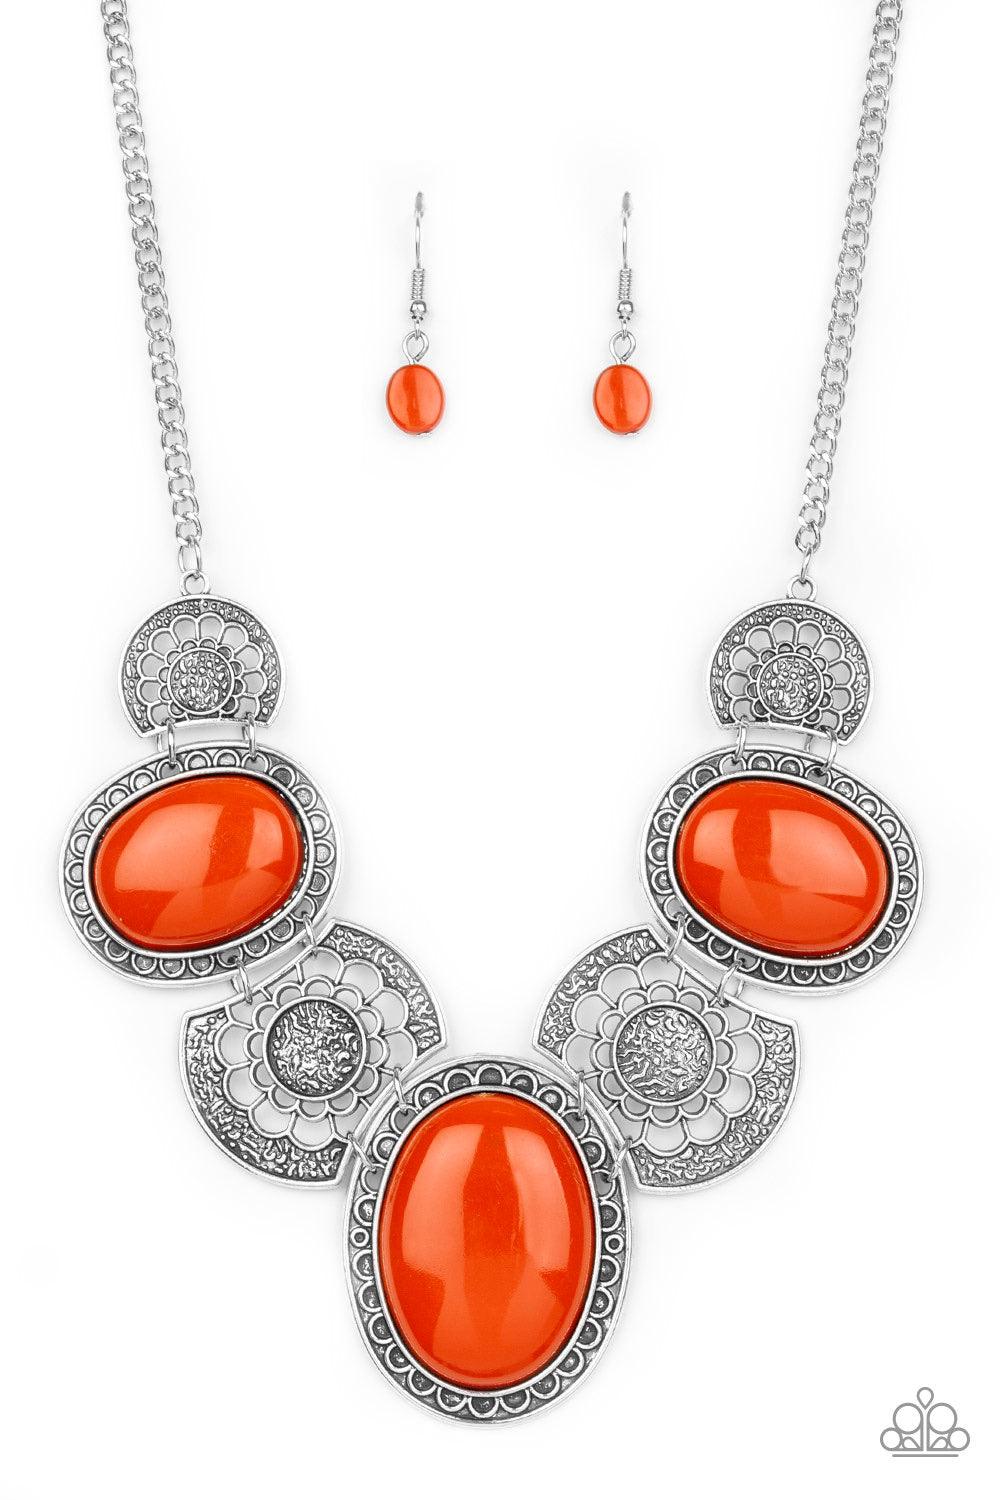 Paparazzi Accessories The Medallion-aire - Orange Flat orange beads connect with shimmery silver floral frames below the collar, creating a colorful medallion-like statement piece with a vintage inflection. Features an adjustable clasp closure. Jewelry